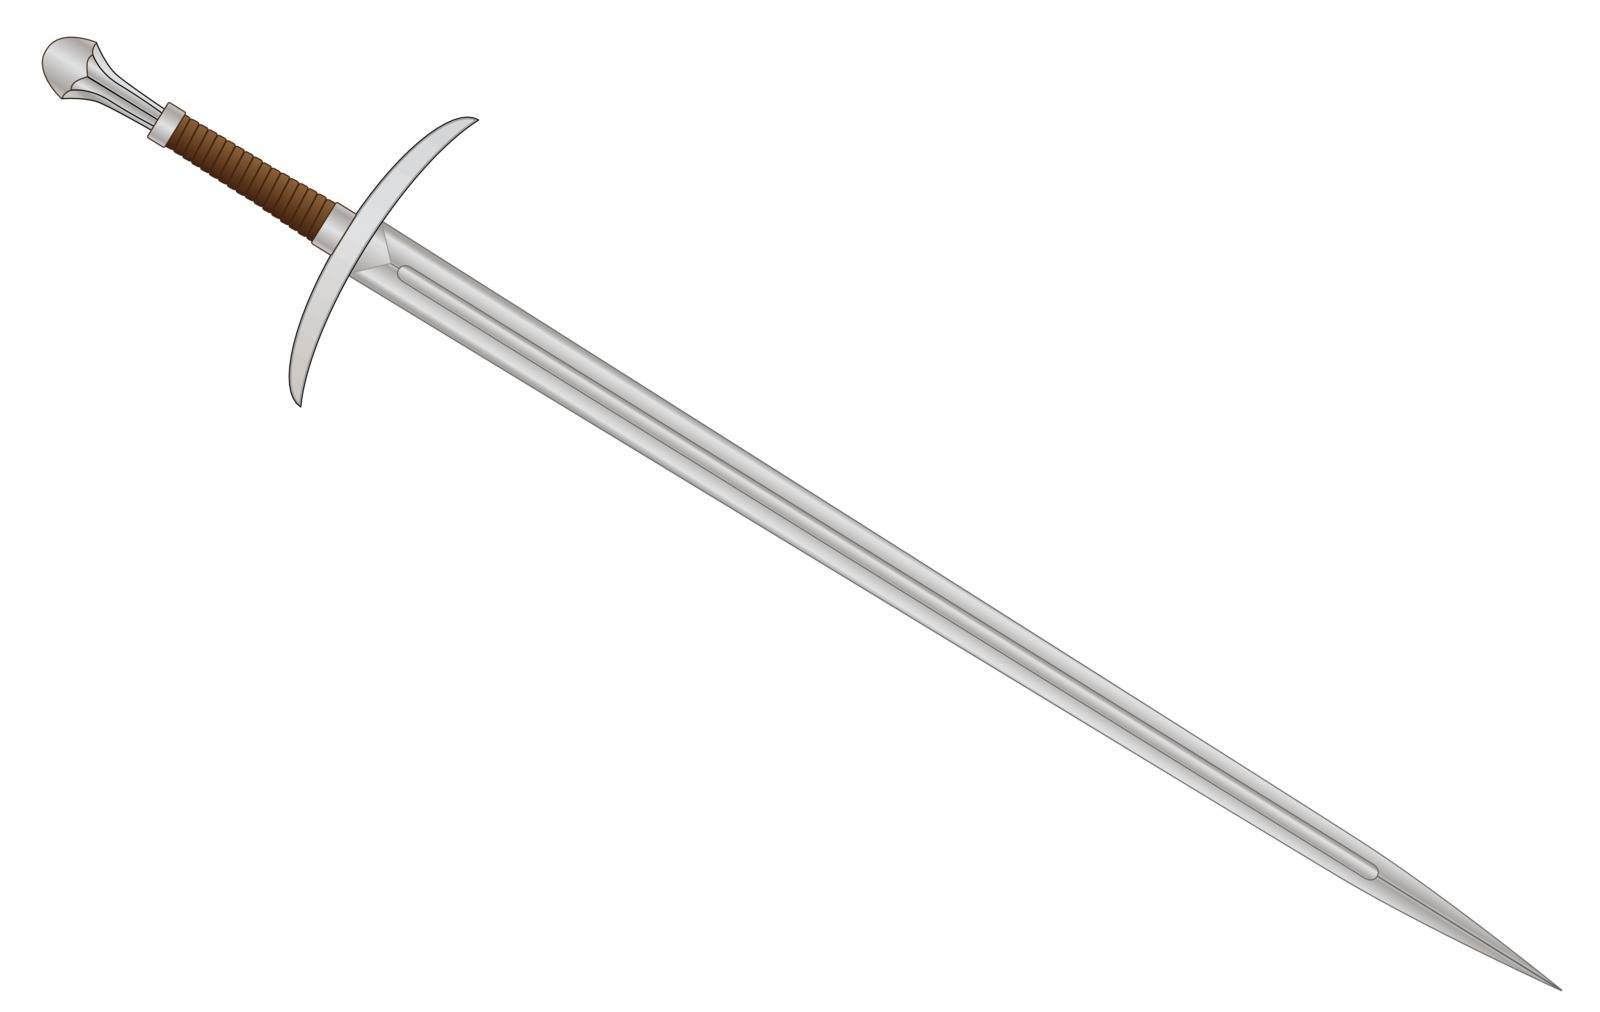 A sword typical of a knight of old isolated on a white background